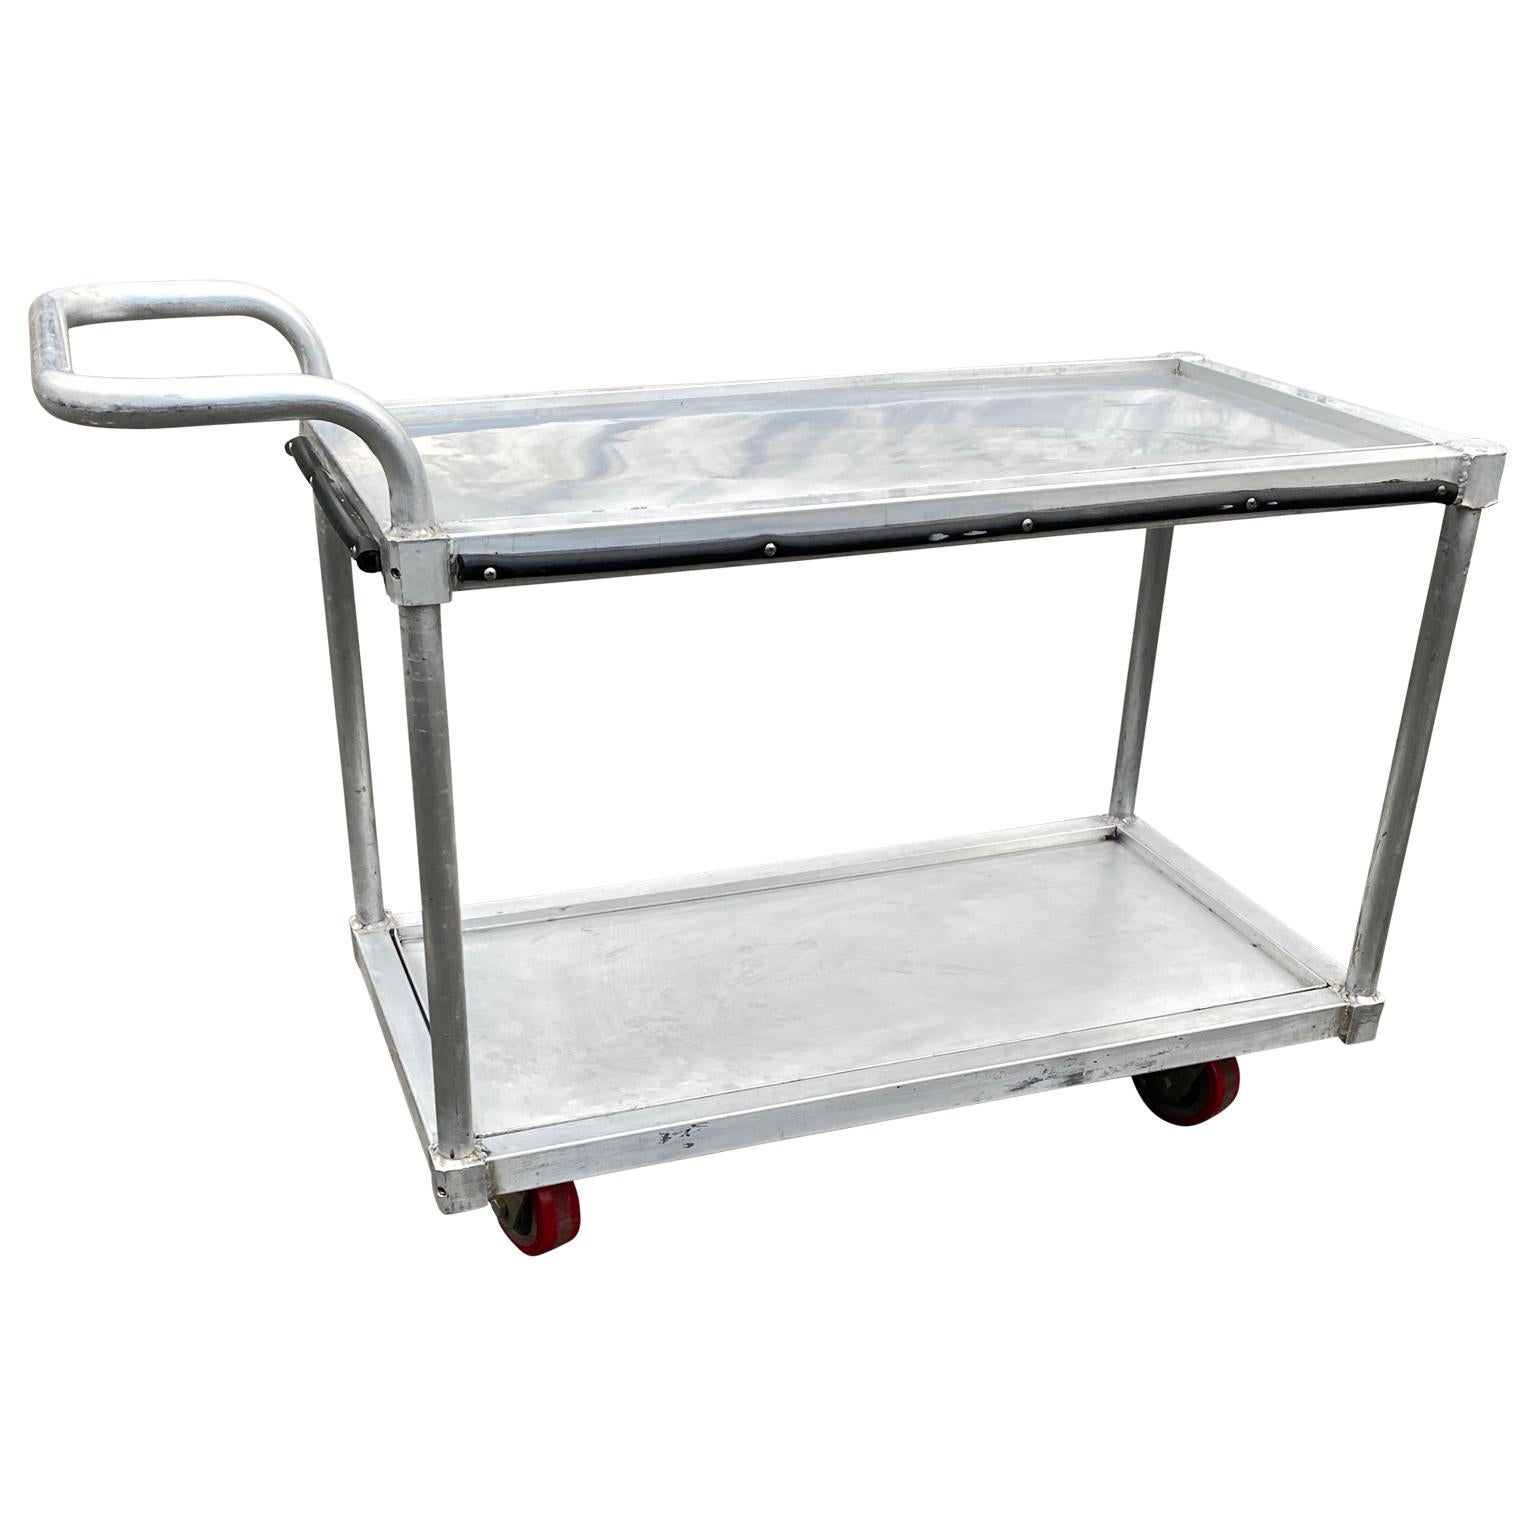 Vintage industrial style two-tier stainless steel rolling bar cart
Each shelf has a detachable tray.

 